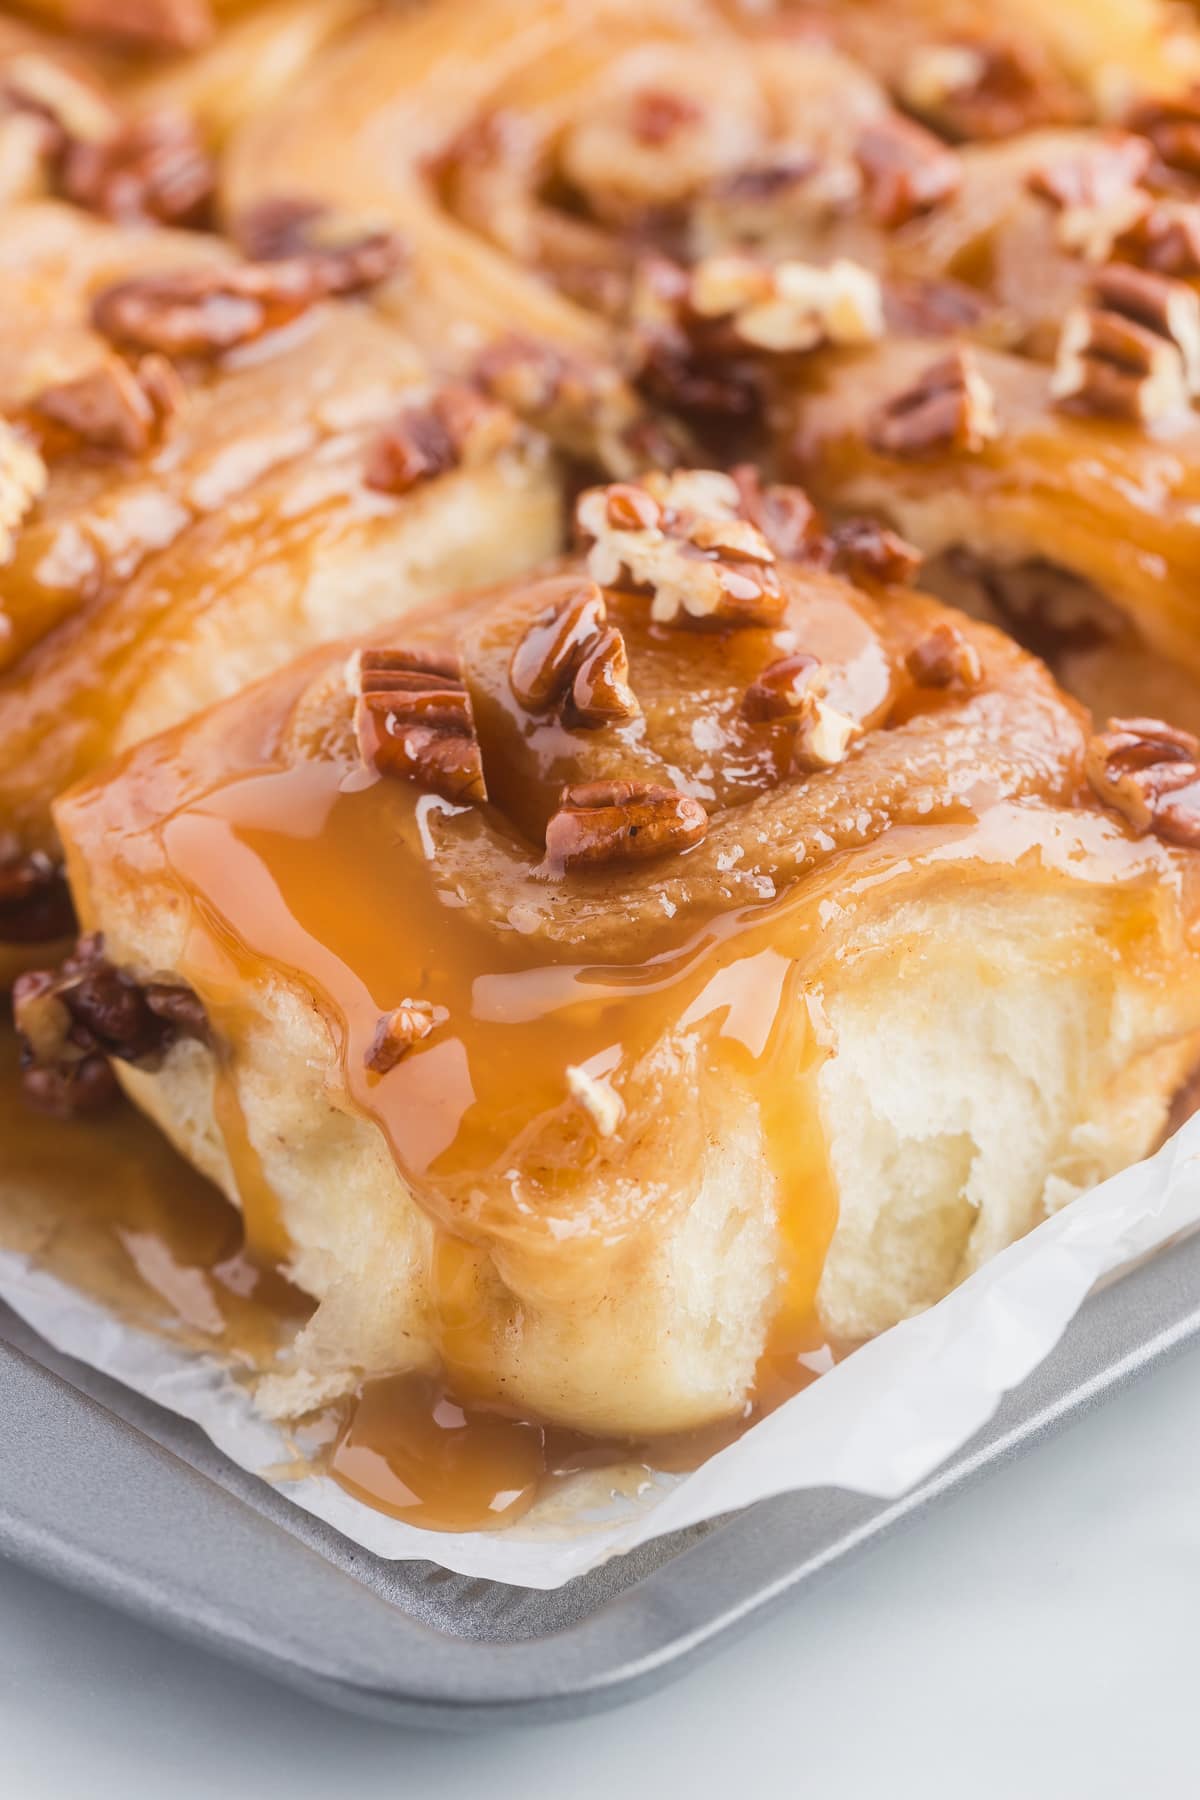 Angled view of a sticky bun